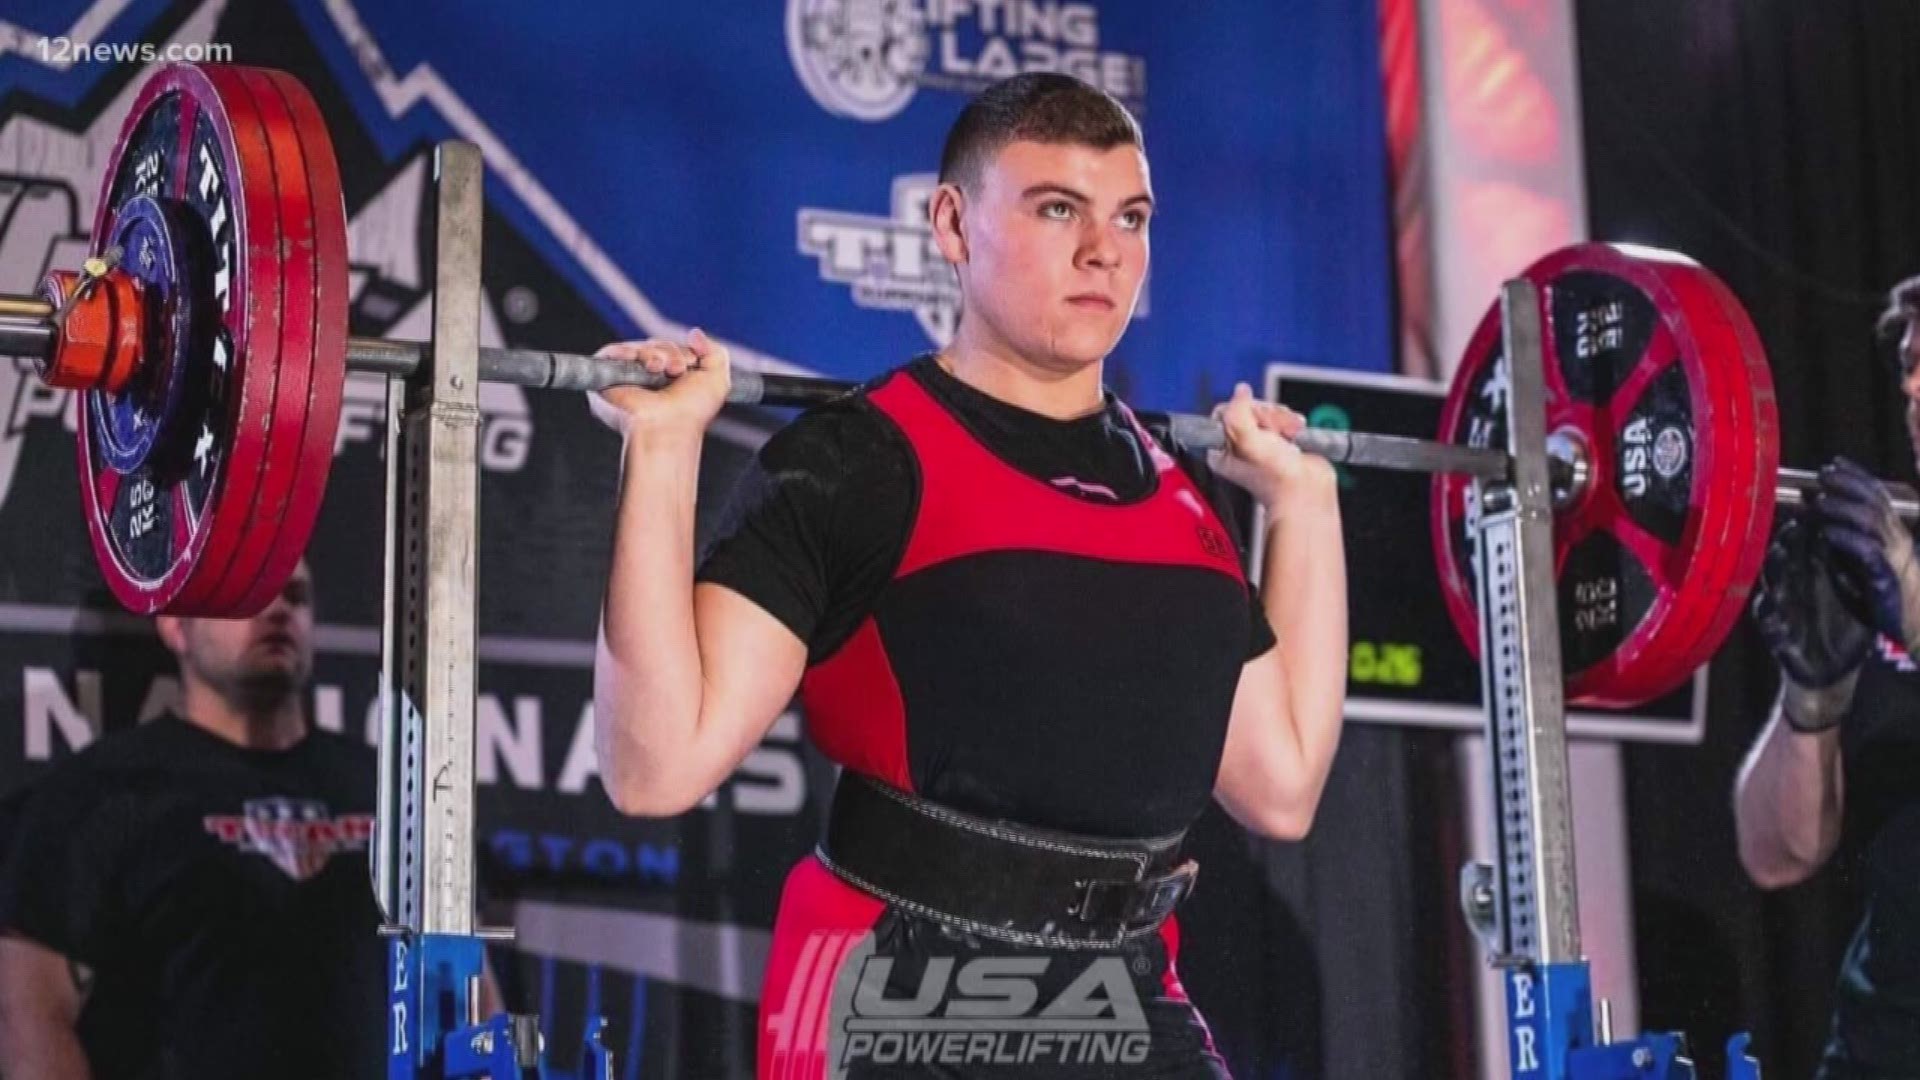 16-year-old Maricopa teen Turner Stanek started powerlifting two years ago and has already started breaking records. He's even earned a spot on Team USA for the IPF Powerlifting Championship in Sweden.